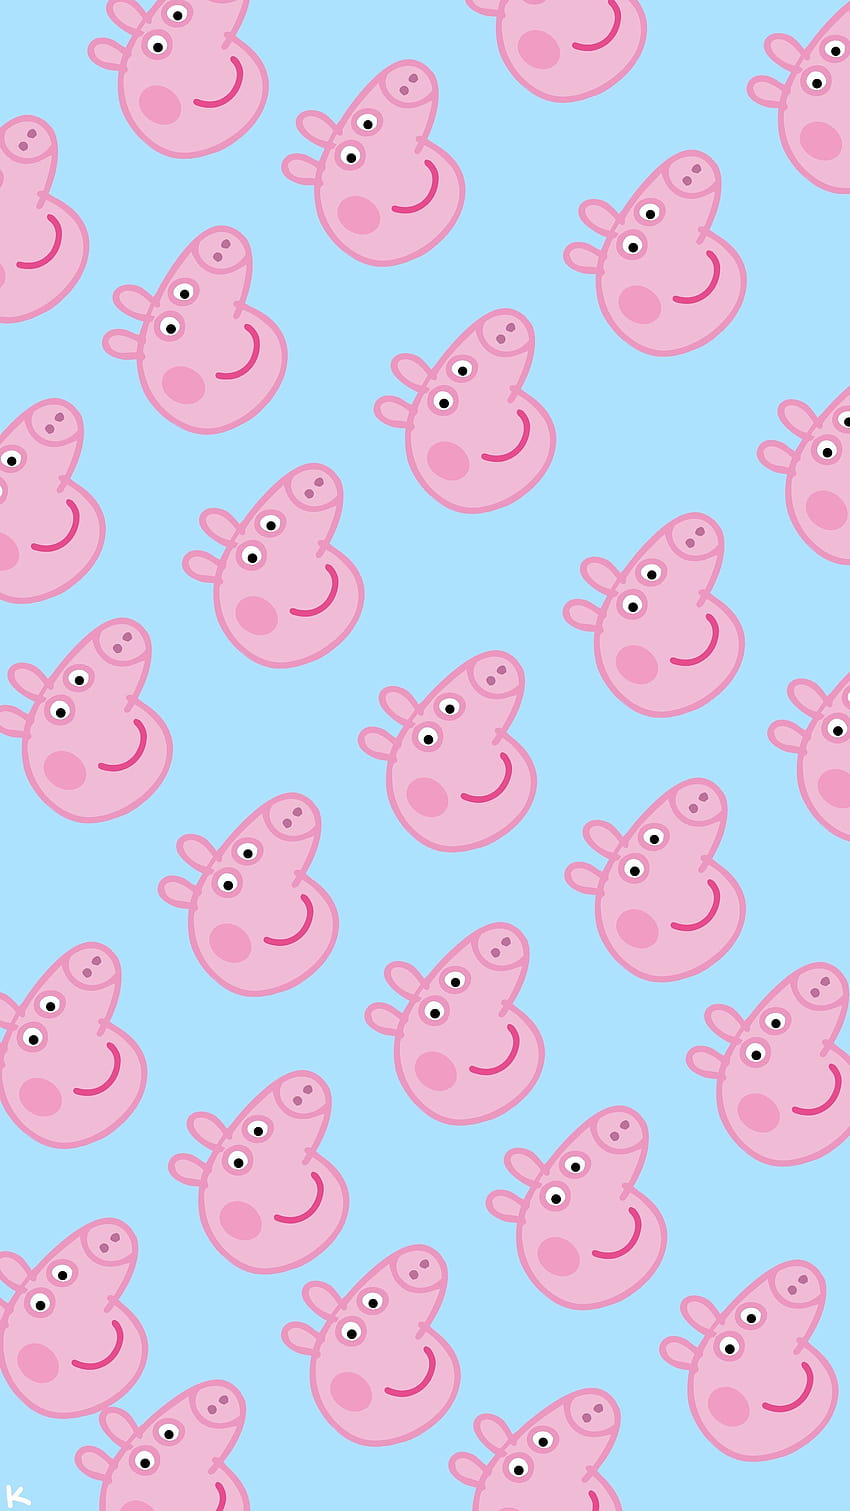 Iphone Backgrounds, peppa pig funny HD phone wallpaper